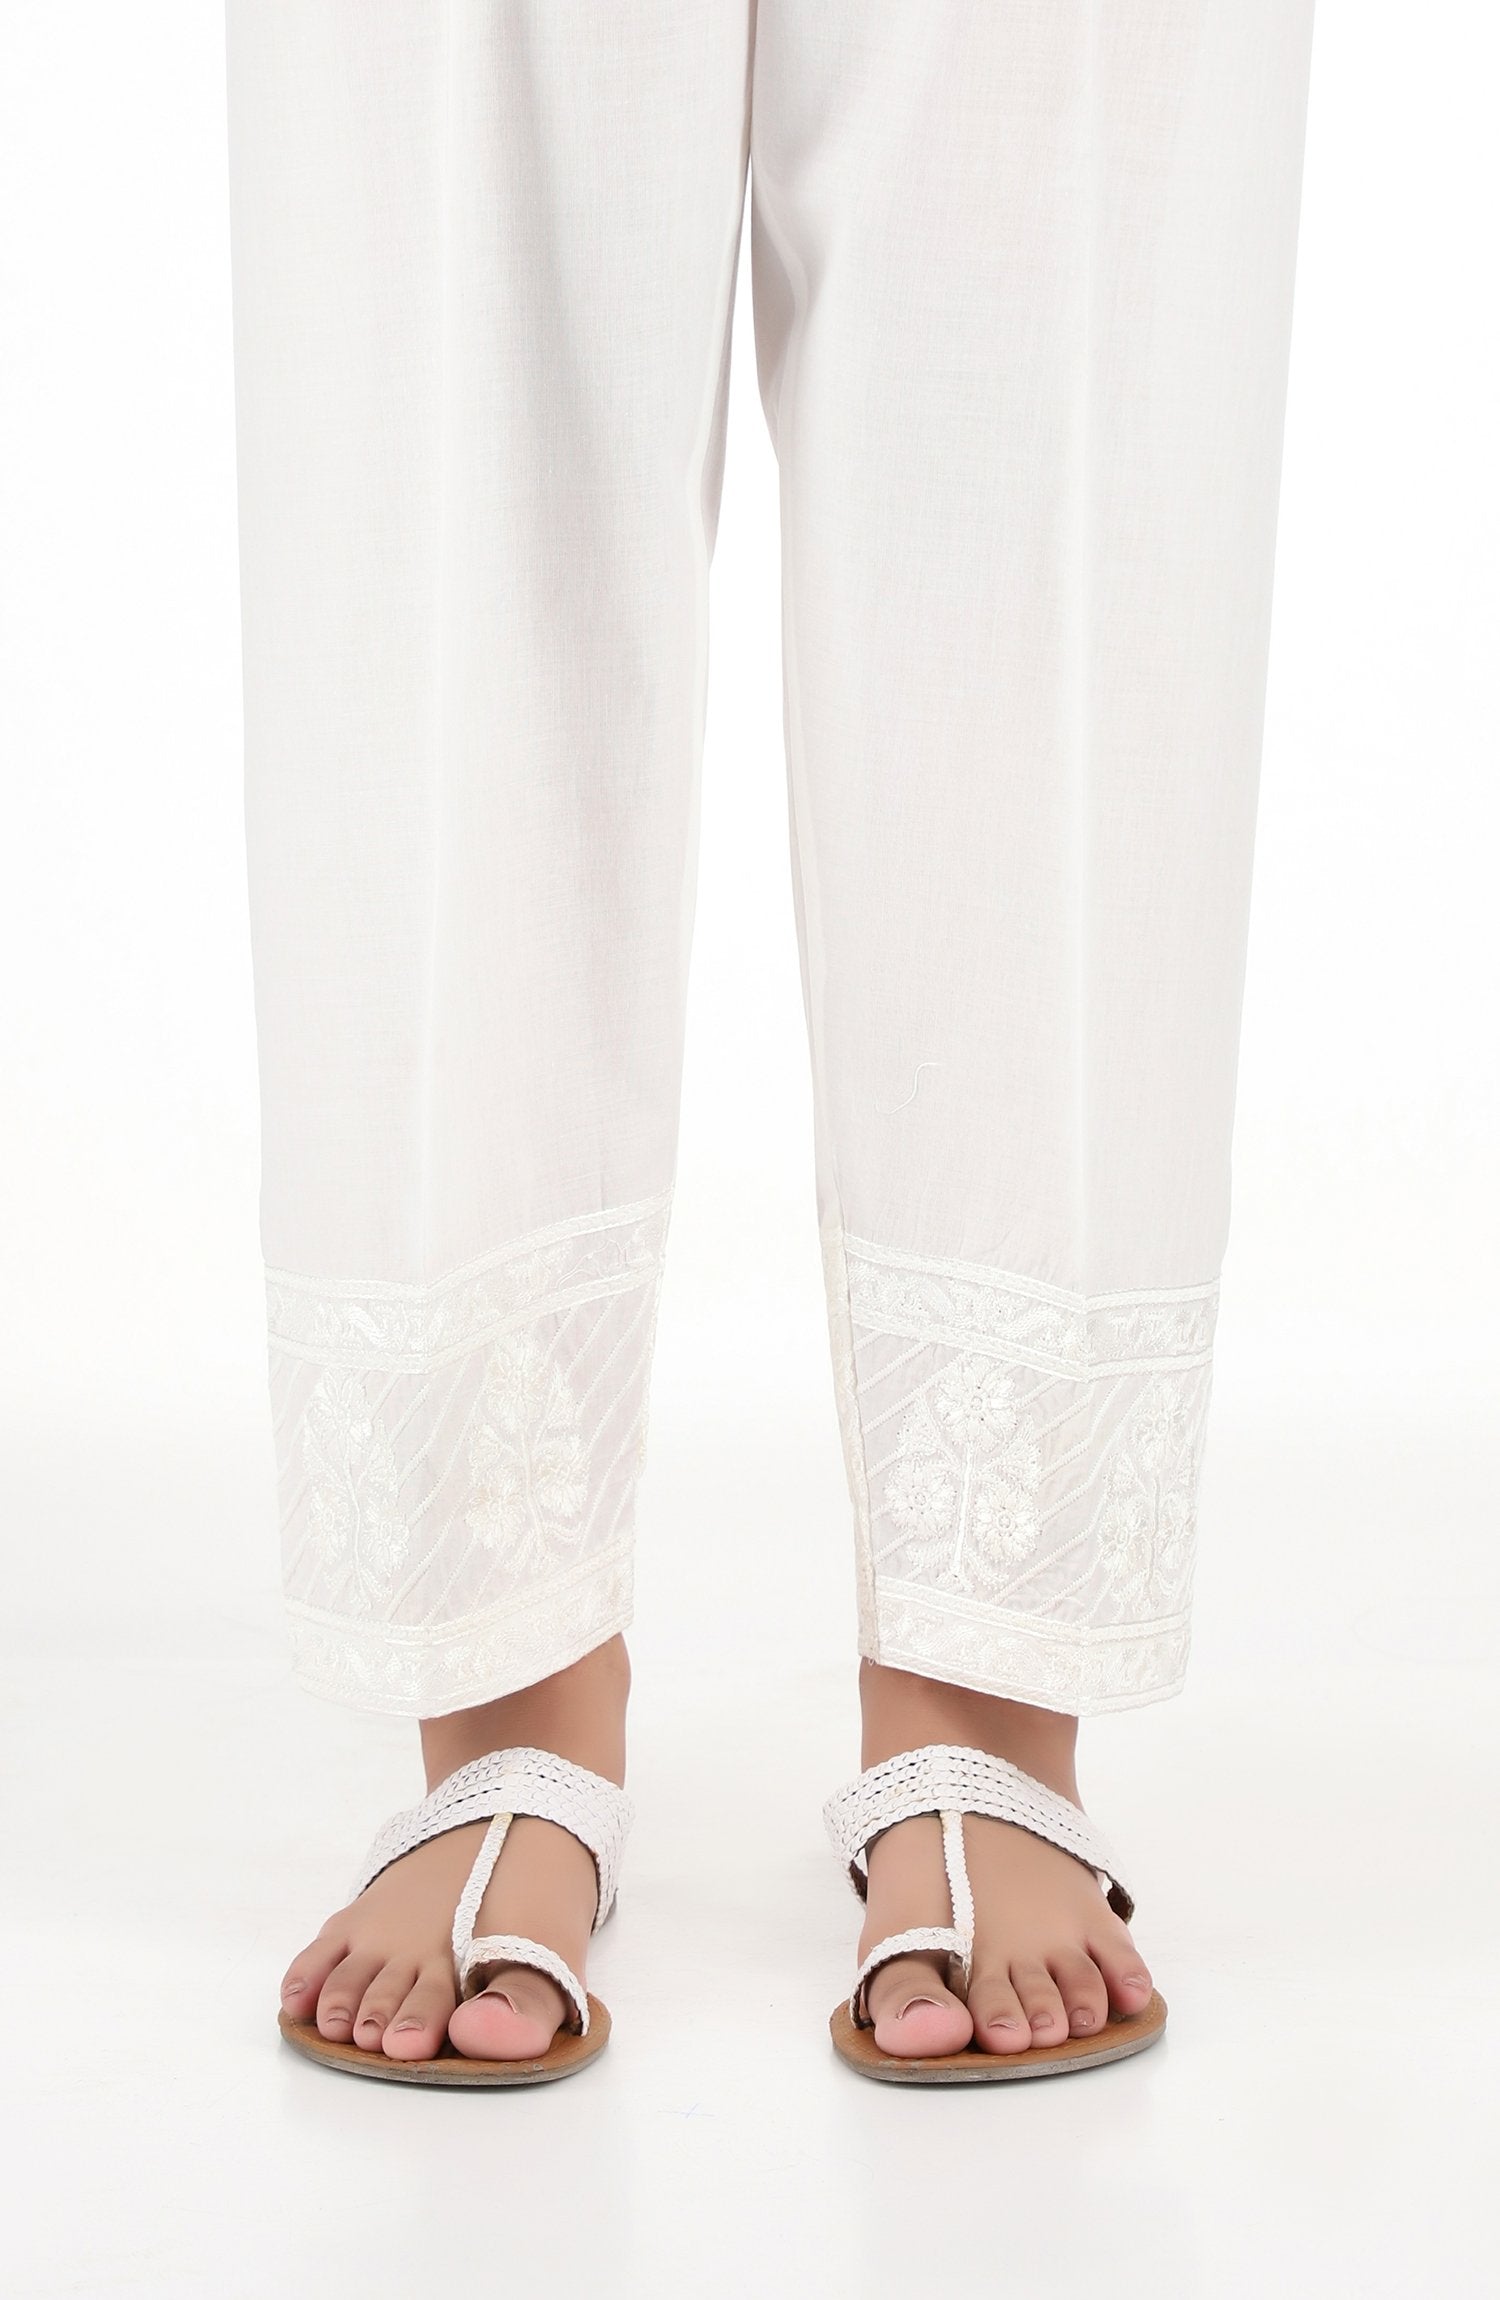 Stitched Embroidered Straight Pants- White (NRPE-027 WHITE)